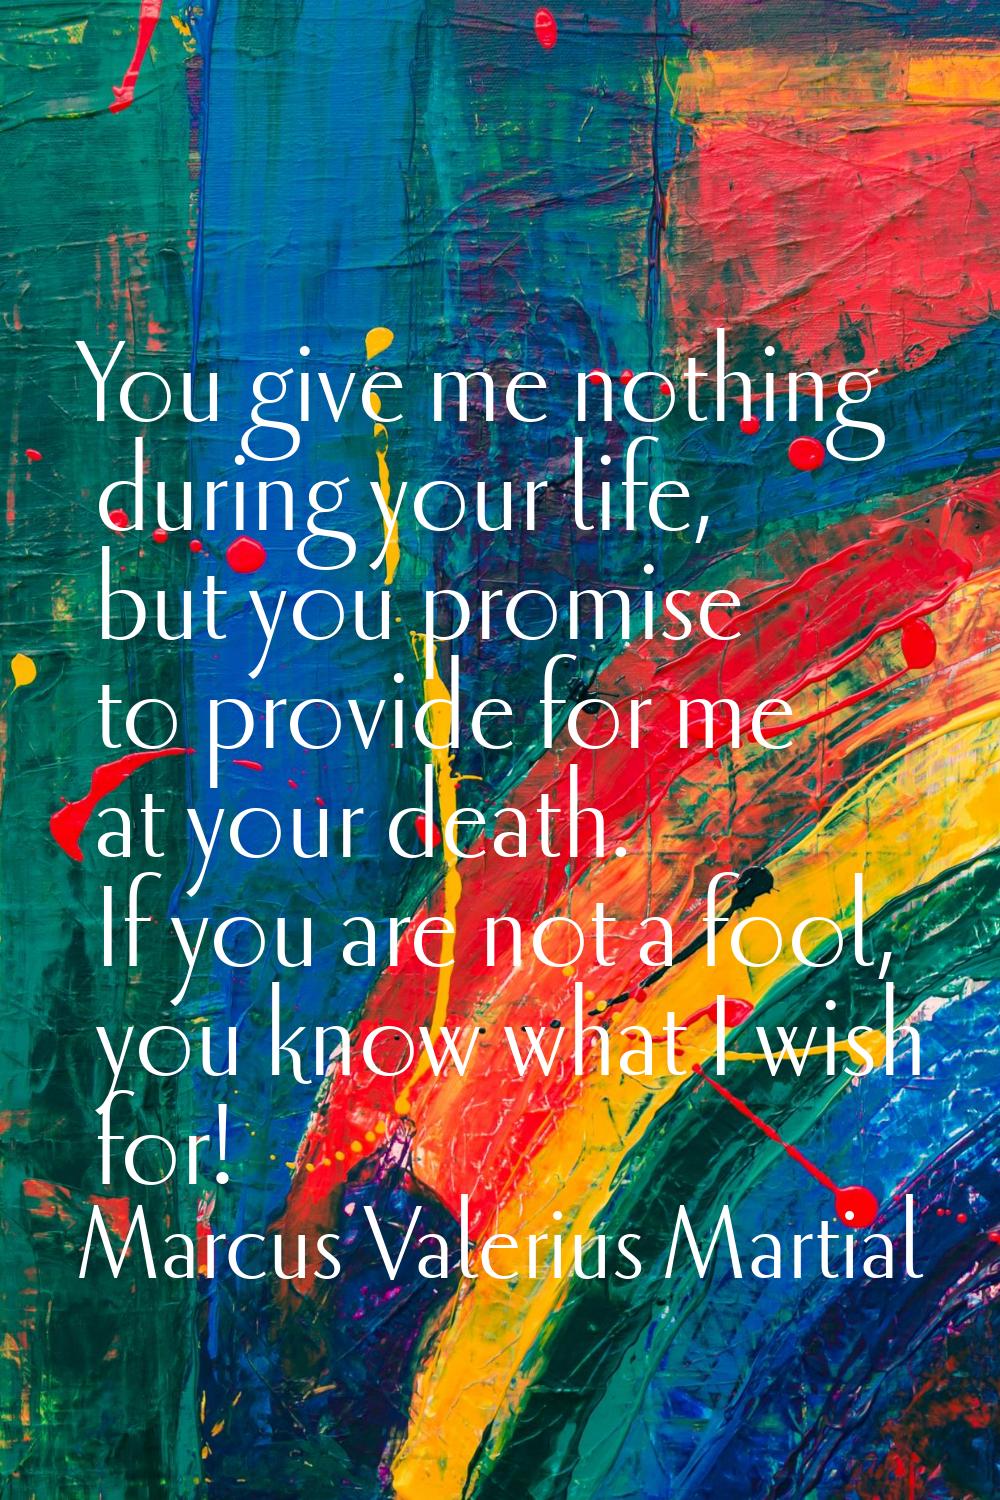 You give me nothing during your life, but you promise to provide for me at your death. If you are n